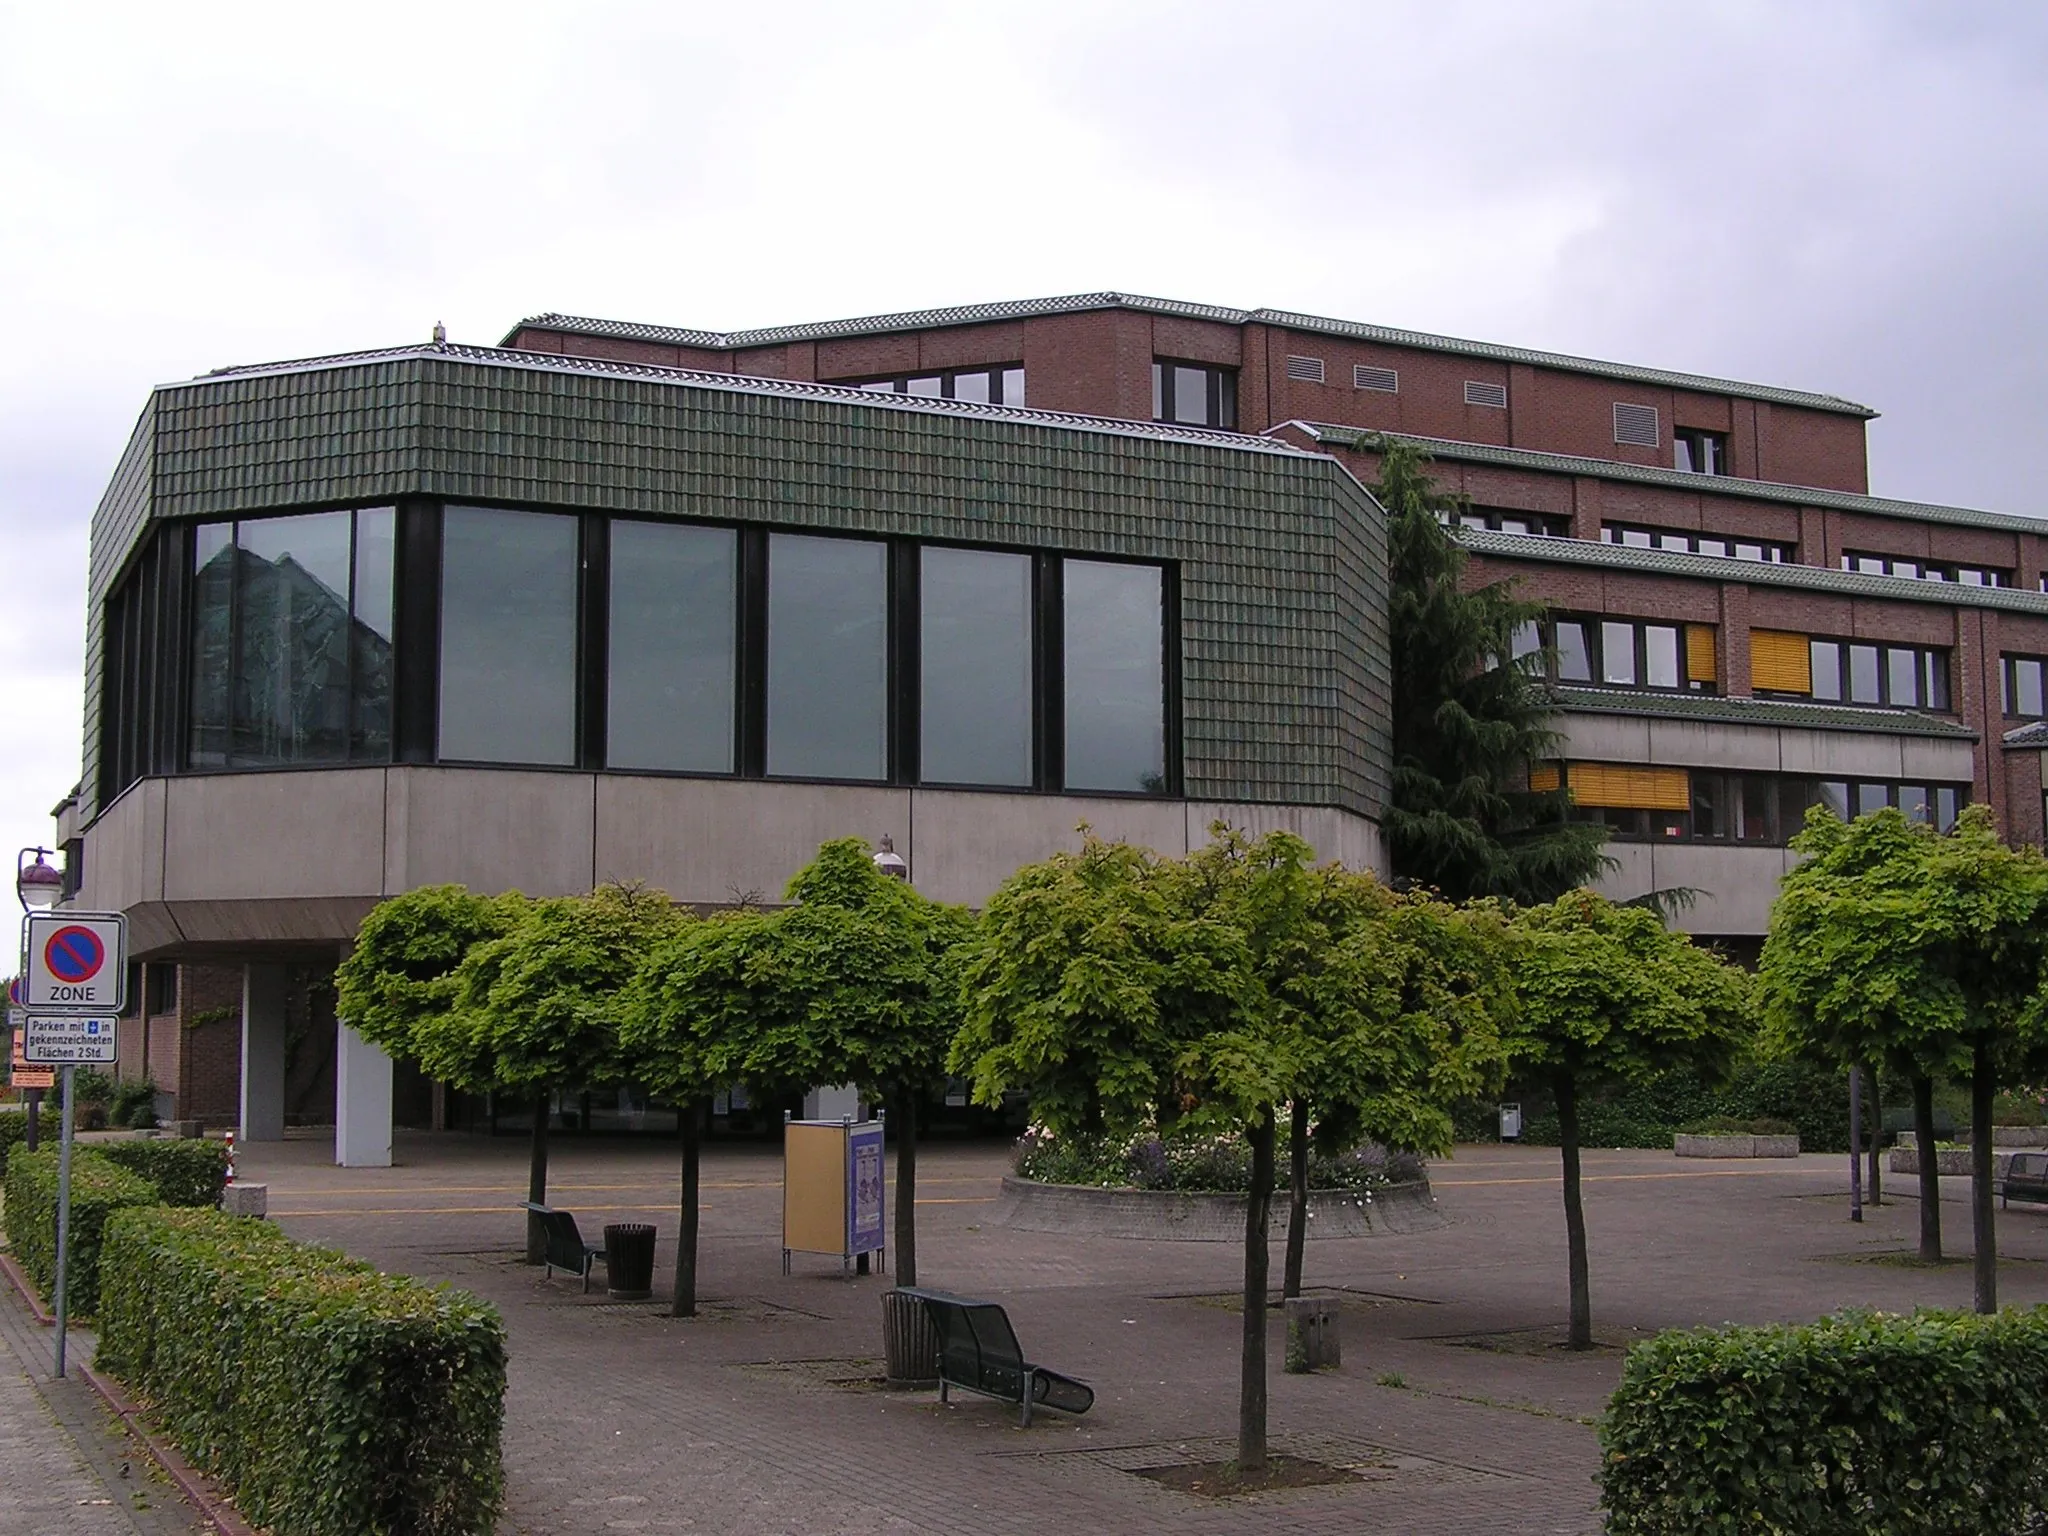 Photo showing: City hall of Voerde, Germany